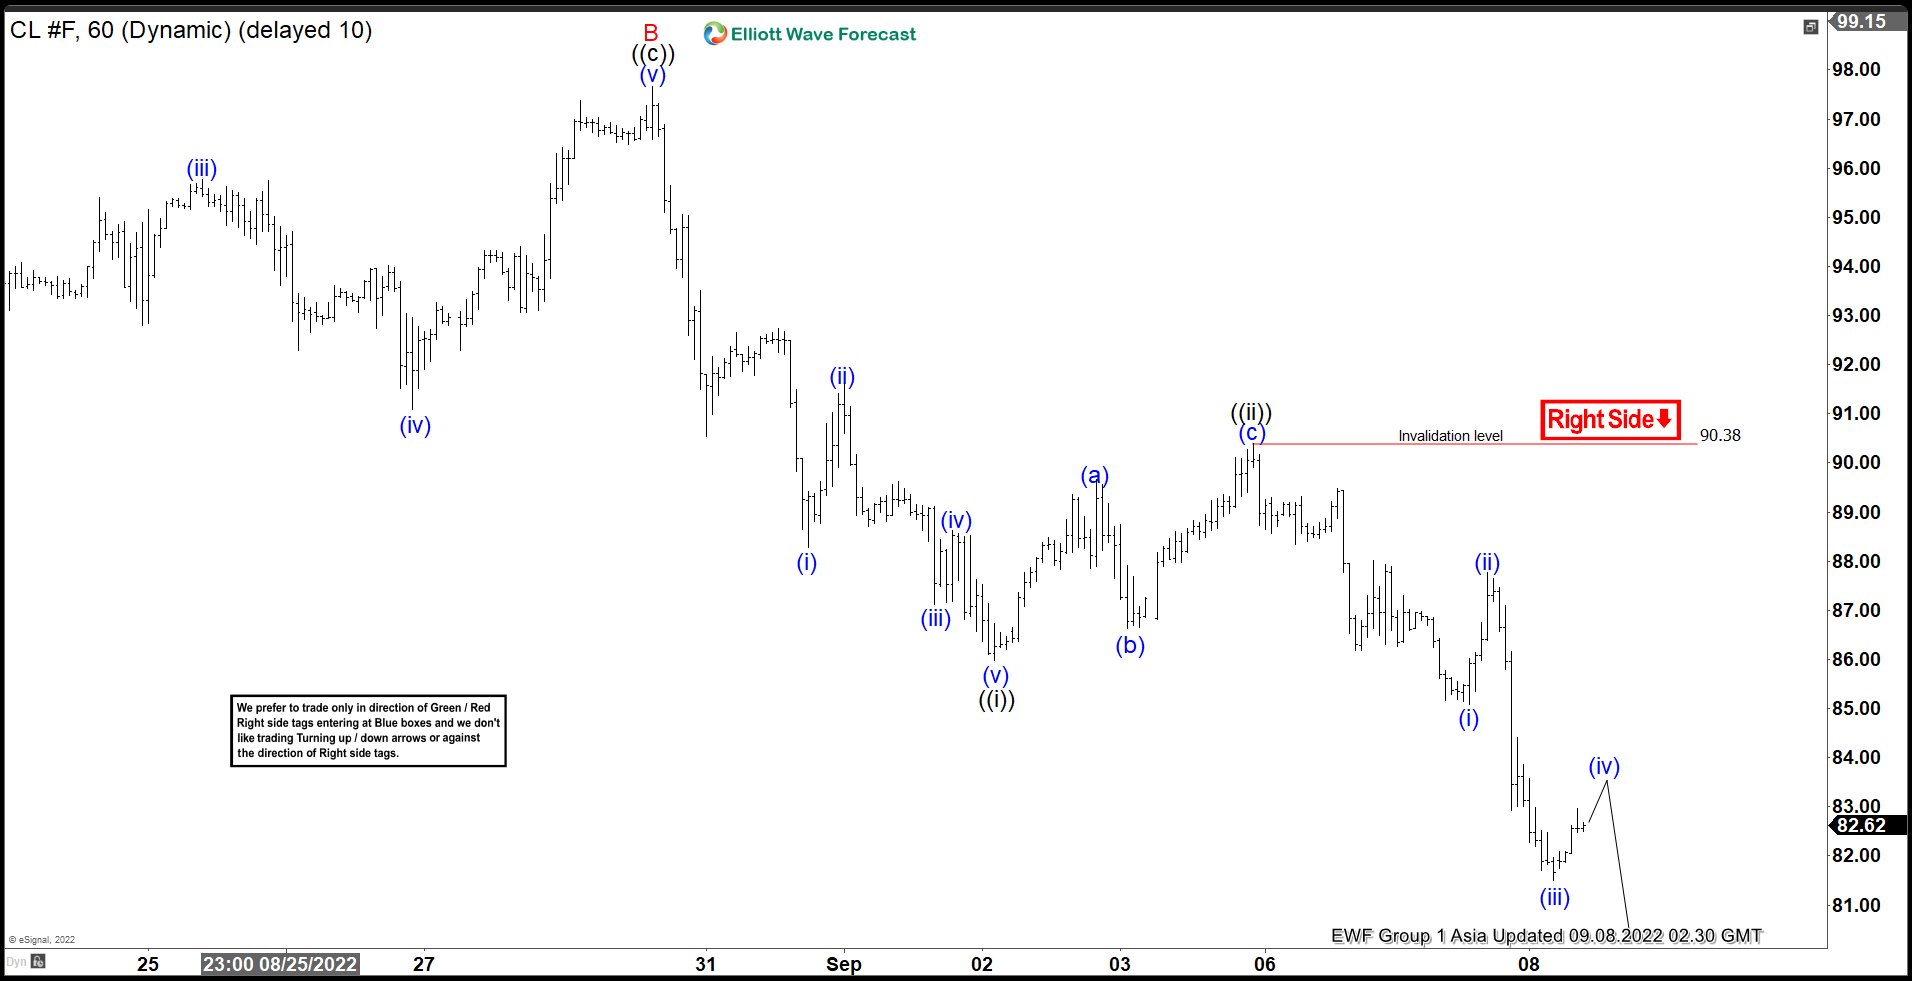 Elliott Wave View: Oil (CL) Has Reached Daily Support